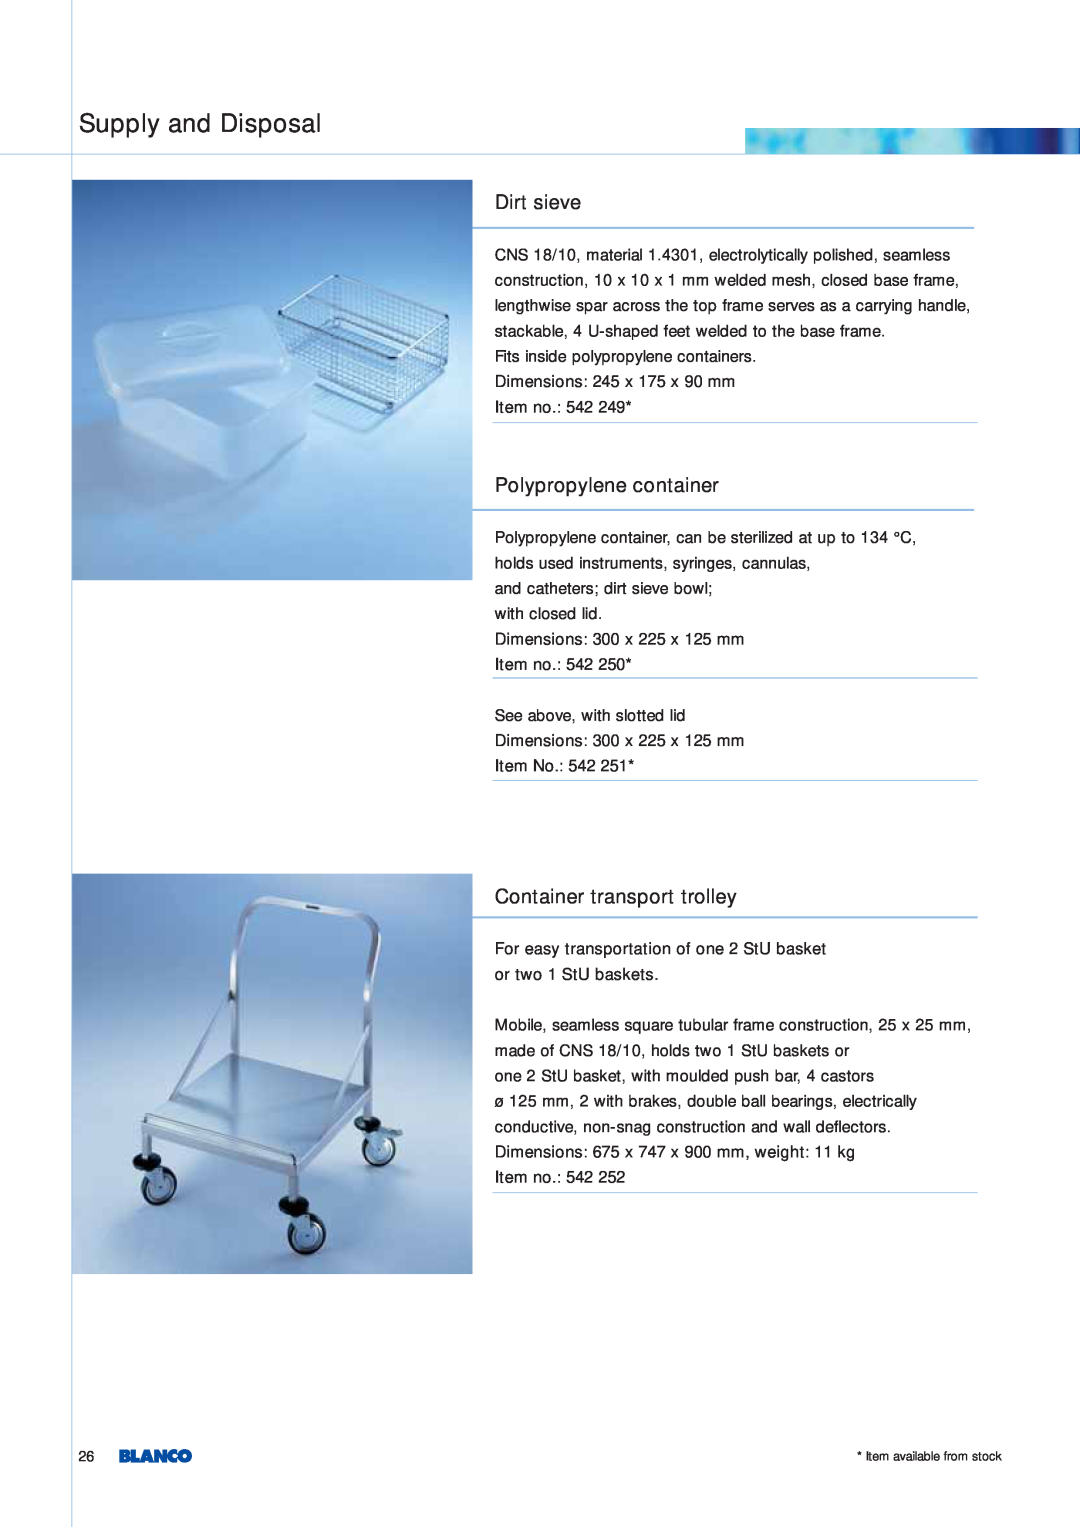 Blanco Tbingen manual Dirt sieve, Polypropylene container, Container transport trolley, Supply and Disposal 